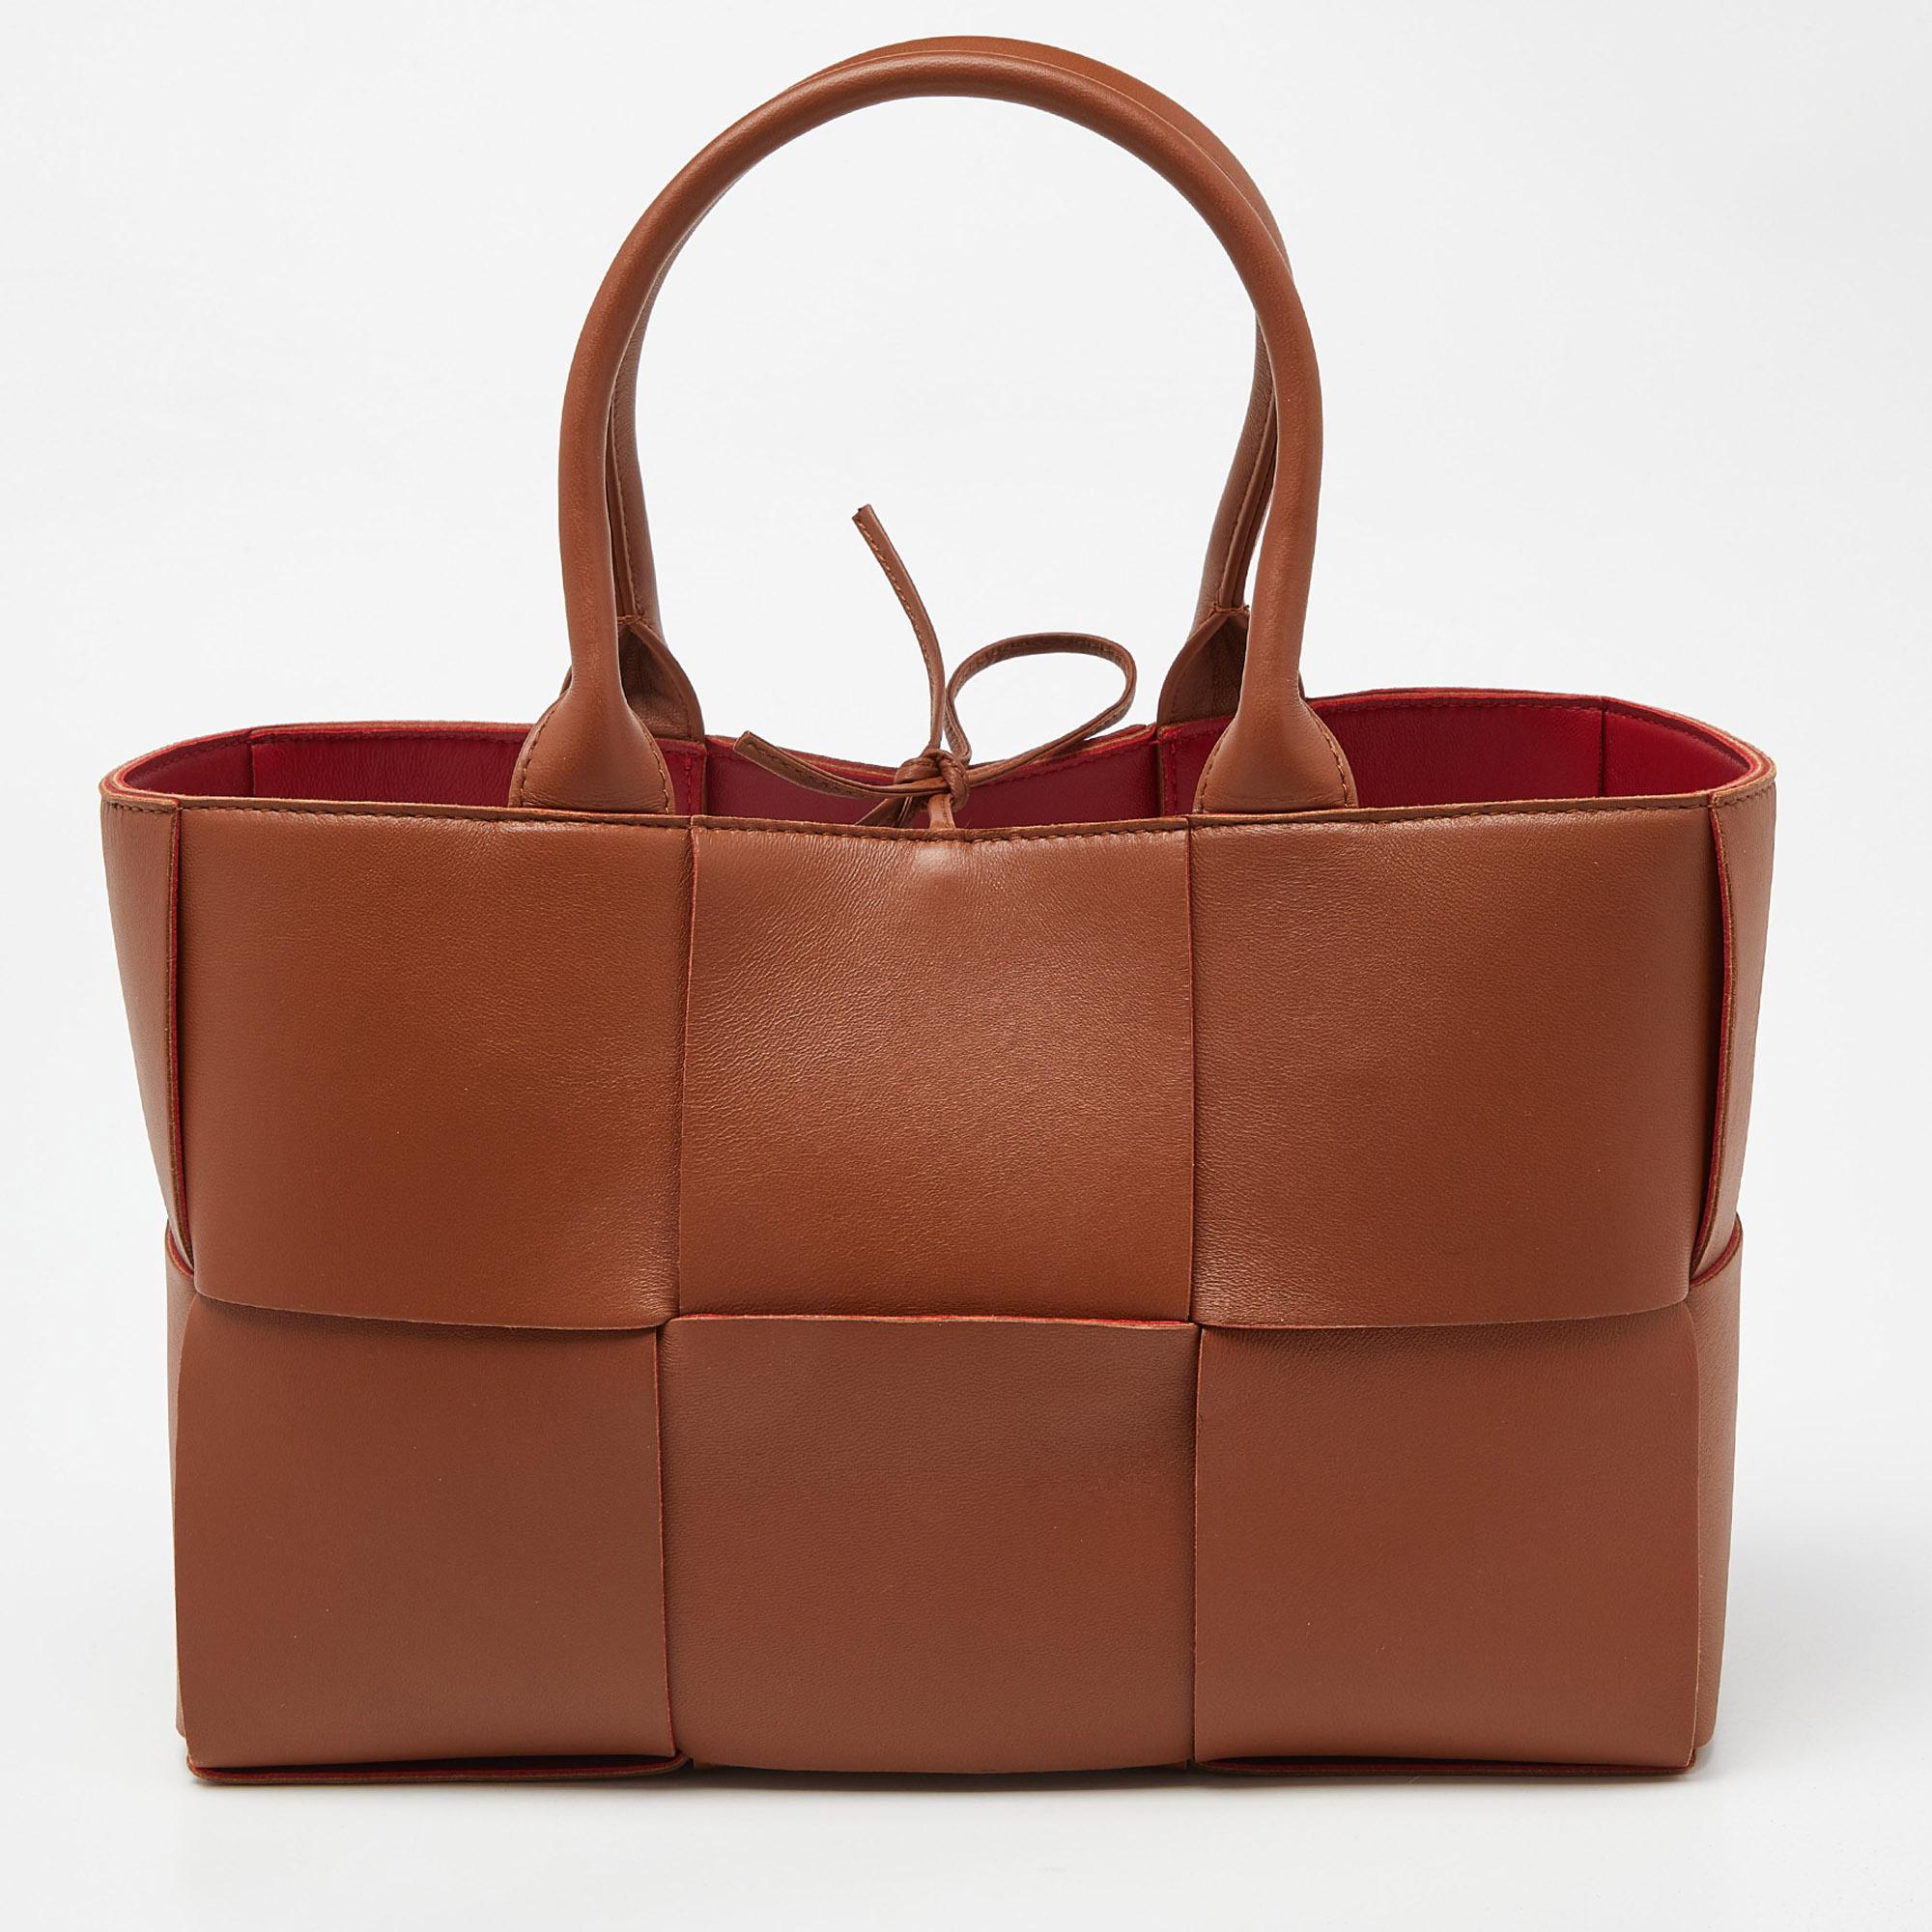 This Arco tote from the House of Bottega Veneta is great for everyday use. It has a brown Intrecciato leather exterior and showcases dual handles, a sturdy shape, and gold-toned hardware. It is provided with a spacious interior.

Includes: Original